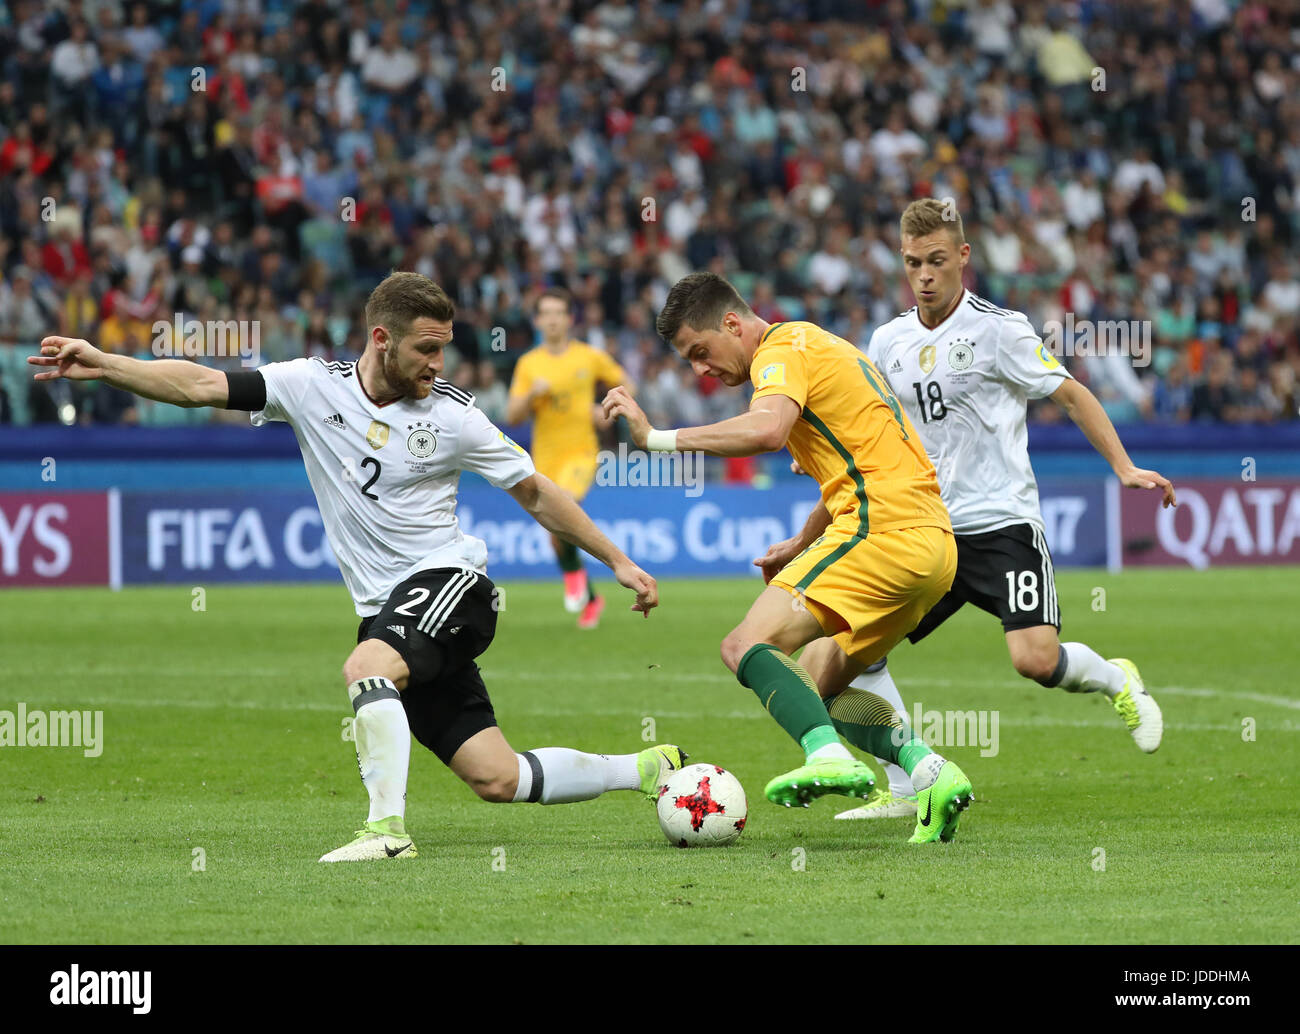 Sochi, Russia. 19th June, 2017. Shkodran Mustafi (L) of Germany vies with Tomi Juric (C) of Australia during during the group B match between Australia and Germany of the 2017 FIFA Confederations Cup in Sochi, Russia, on June 19, 2017. Germany won 3-2. Credit: Xu Zijian/Xinhua/Alamy Live News Stock Photo